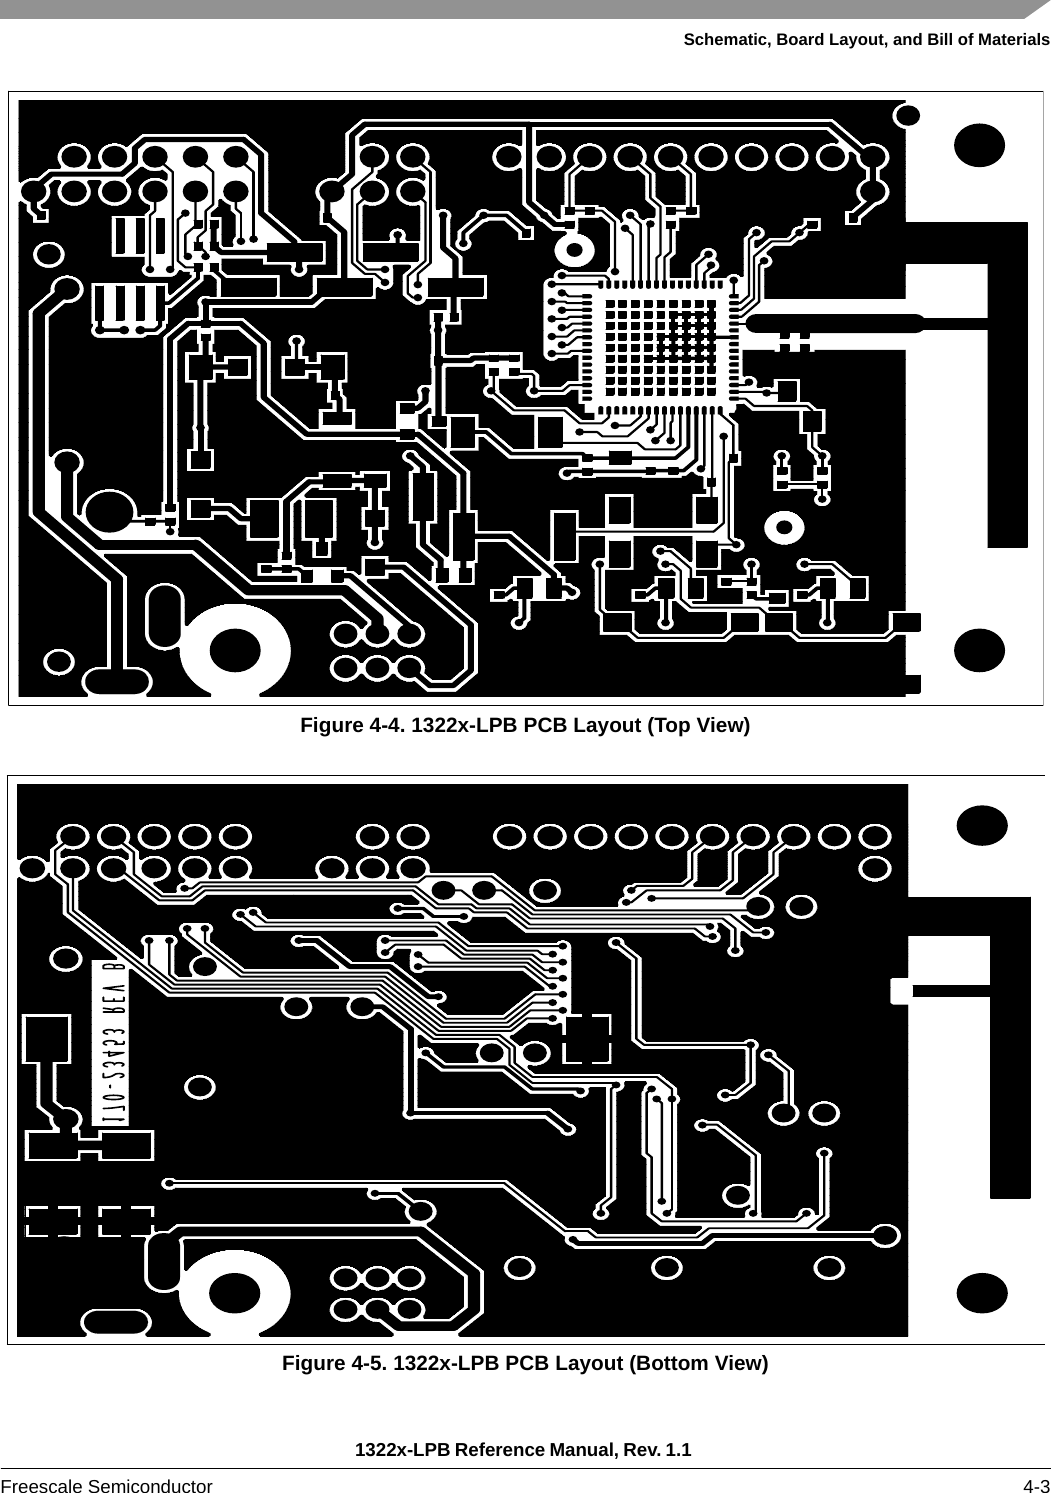 Schematic, Board Layout, and Bill of Materials1322x-LPB Reference Manual, Rev. 1.1 Freescale Semiconductor 4-3Figure 4-4. 1322x-LPB PCB Layout (Top View)Figure 4-5. 1322x-LPB PCB Layout (Bottom View)